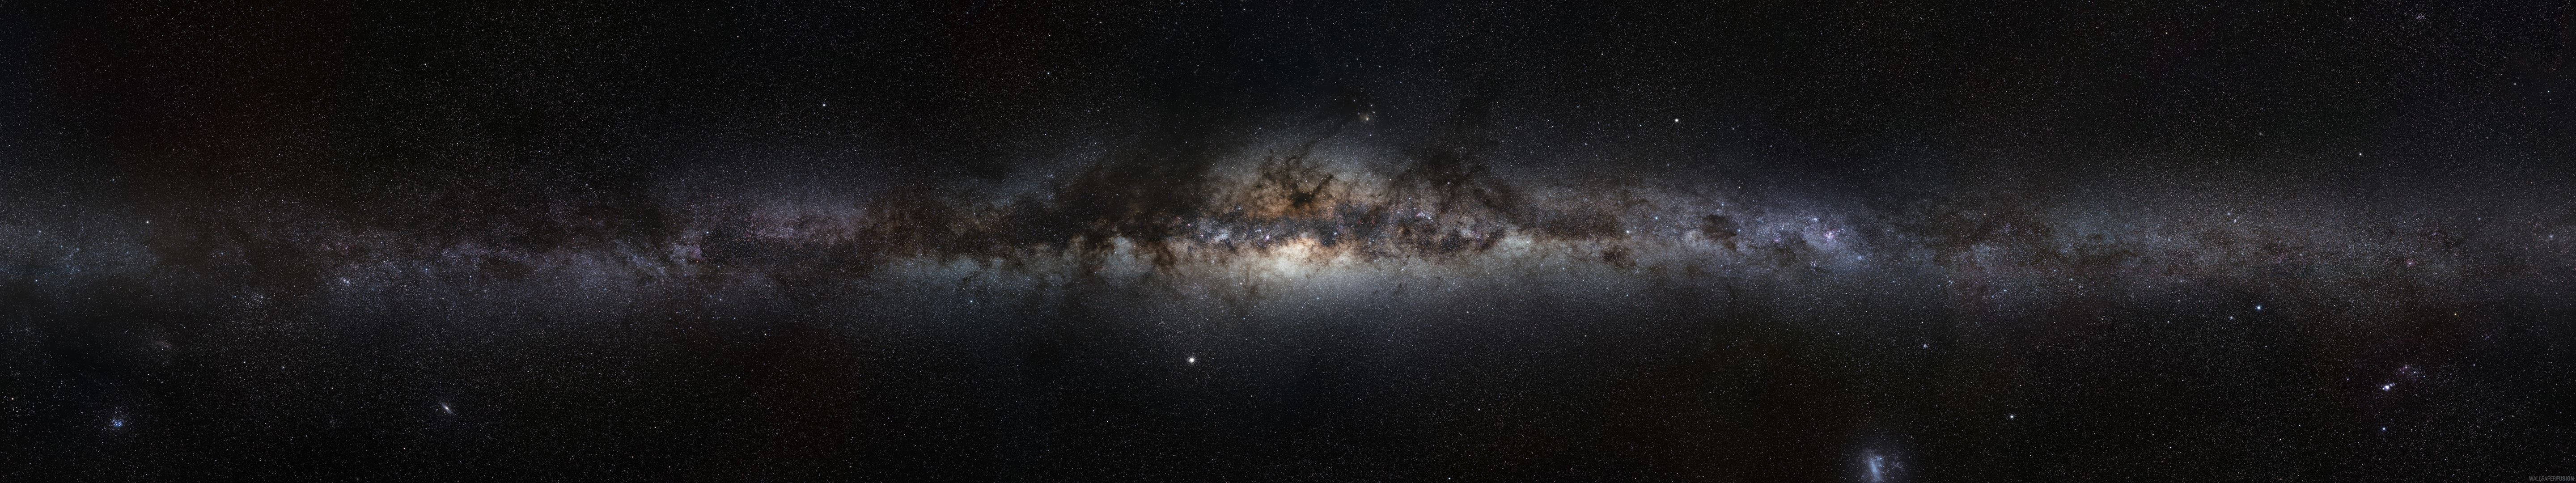 The Milky Way Wide